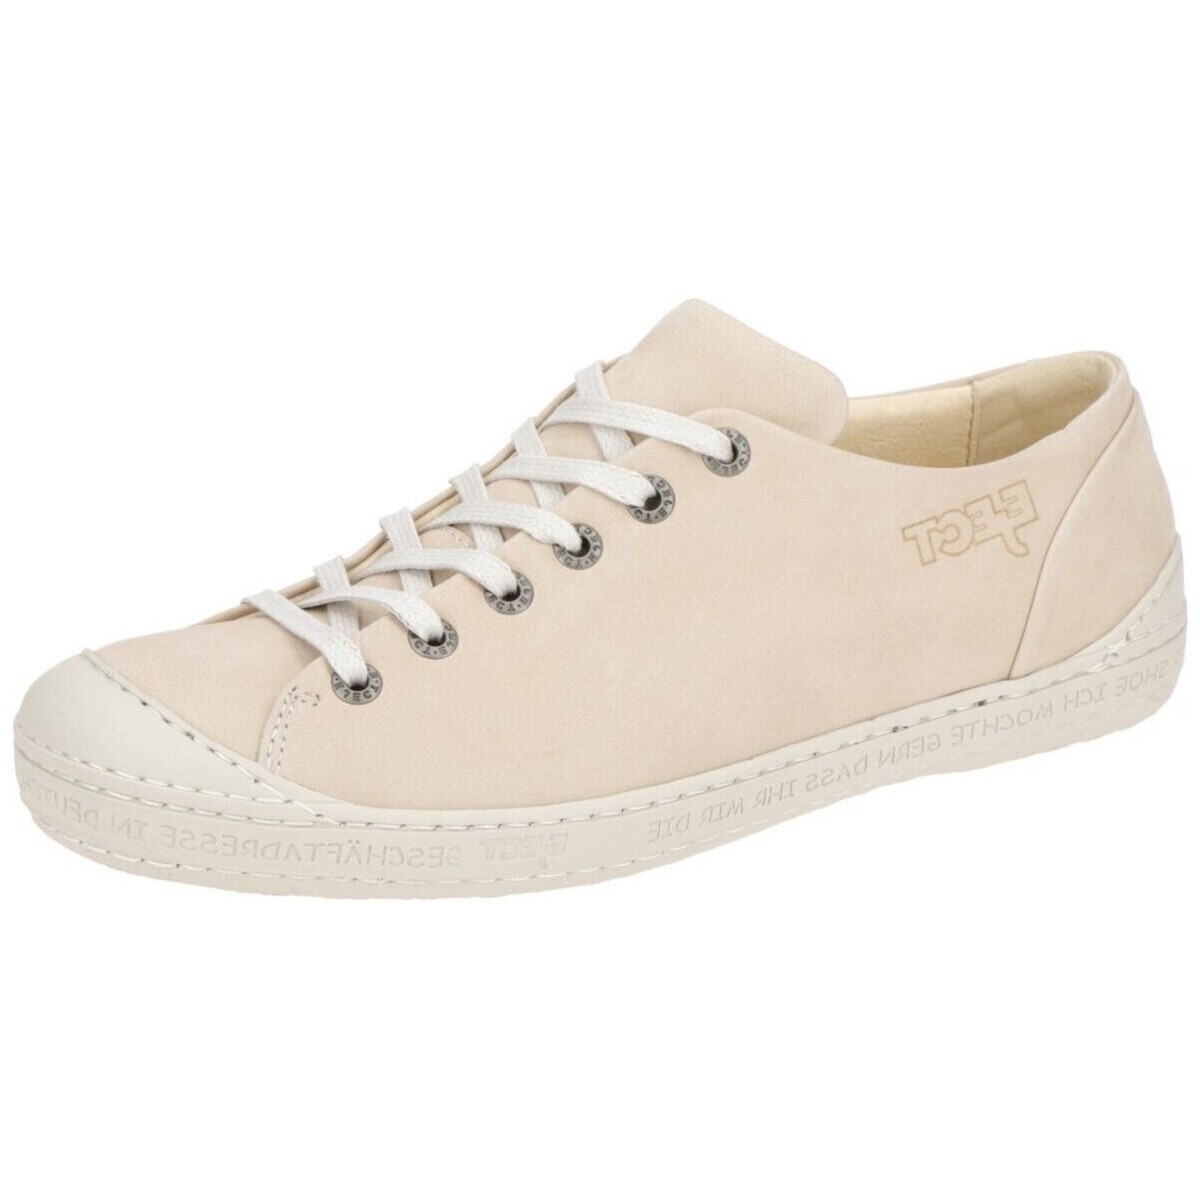 Chaussures Femme Zadig & Voltaire Eject  Beige